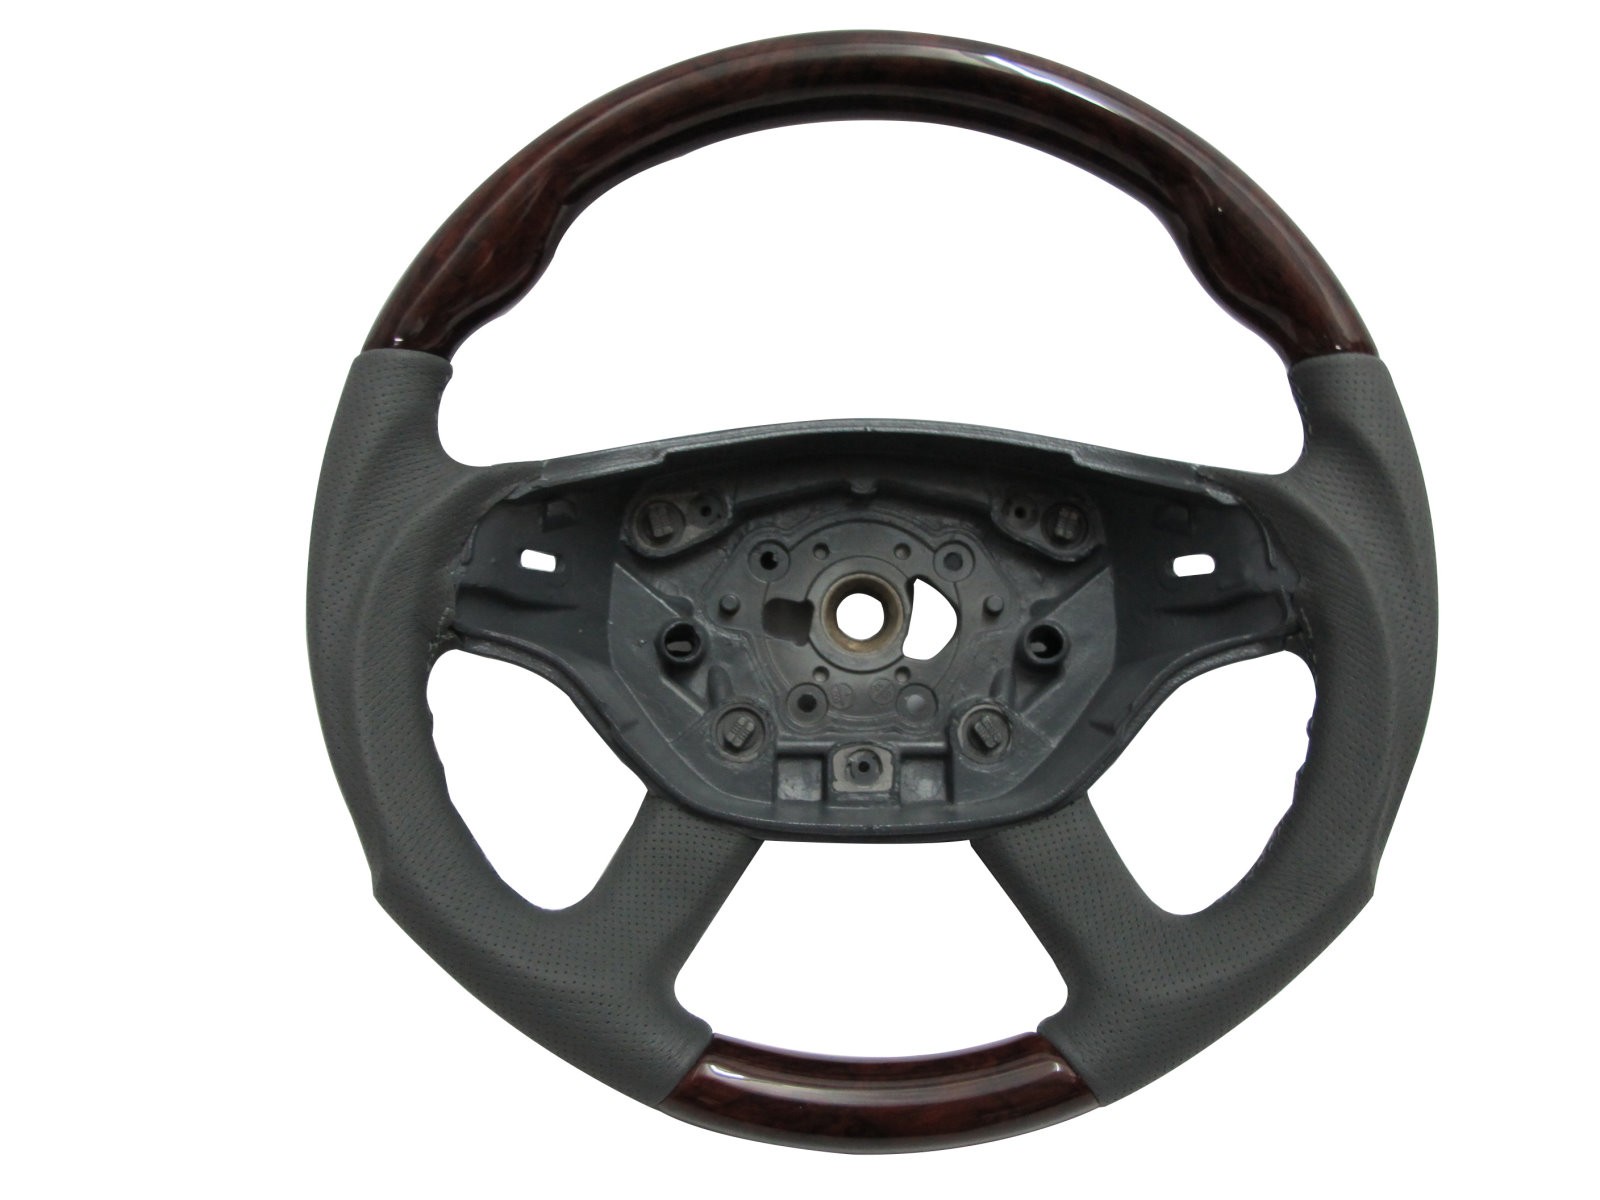 CrazyTheGod W216/C216 2008-2009 FACELIFTED STEERING WHEEL SPORT Walnut WOOD GRAY Leather for Mercedes-Benz